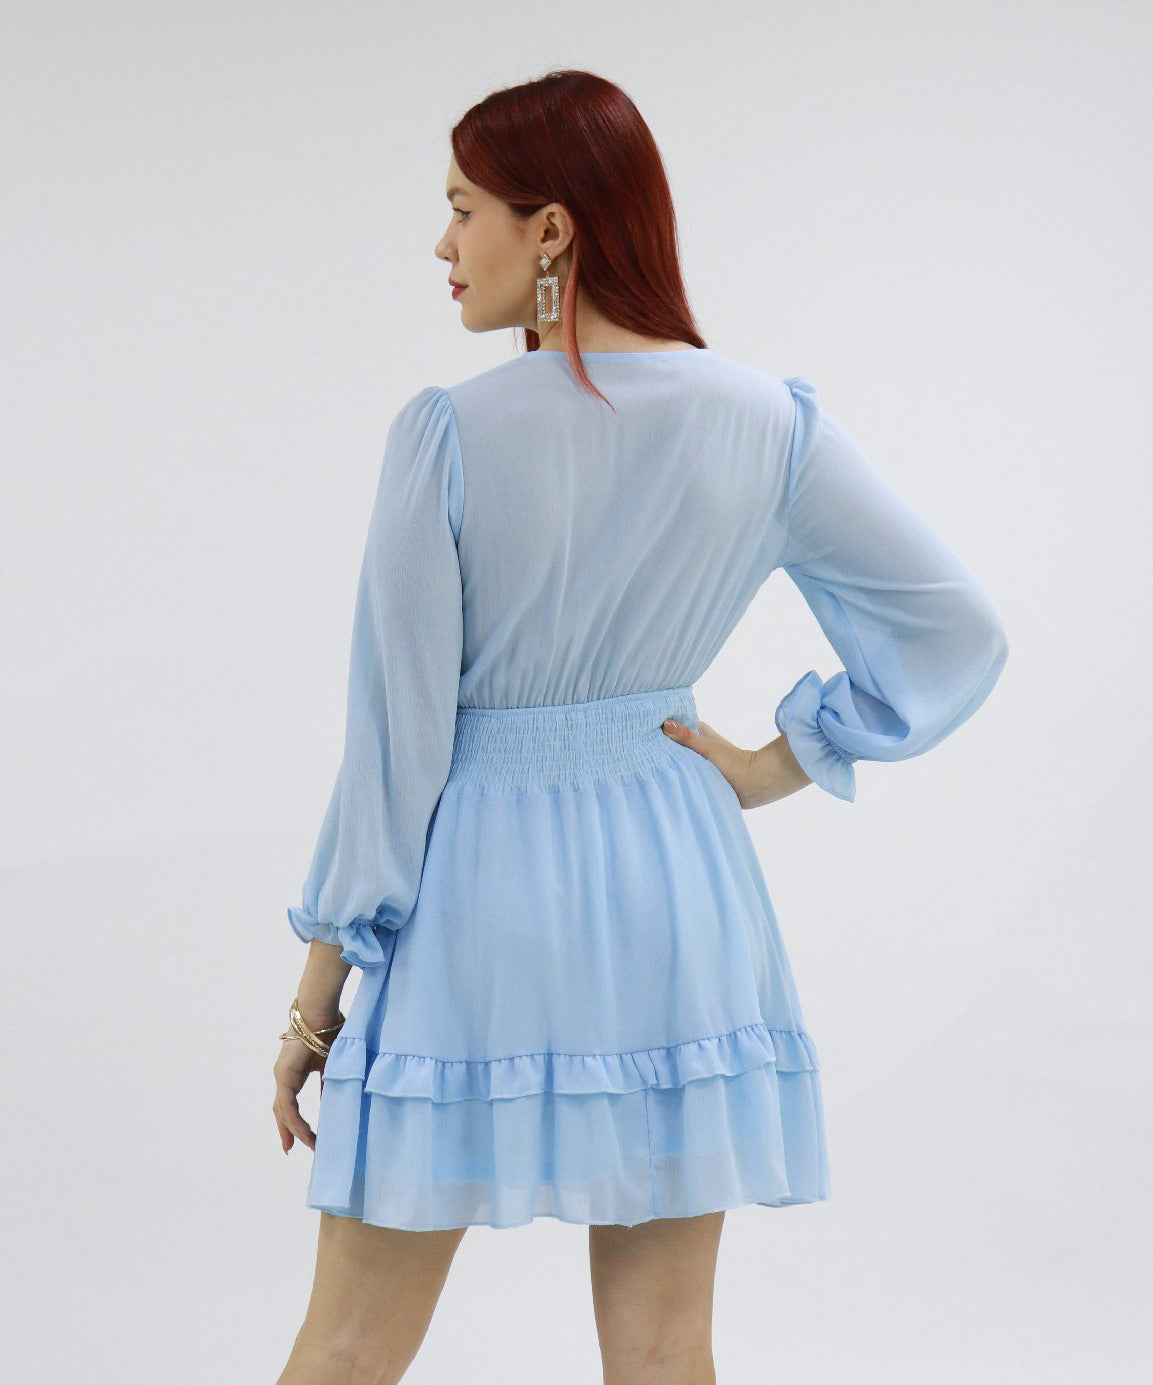 Talena Dresses In Baby Blue